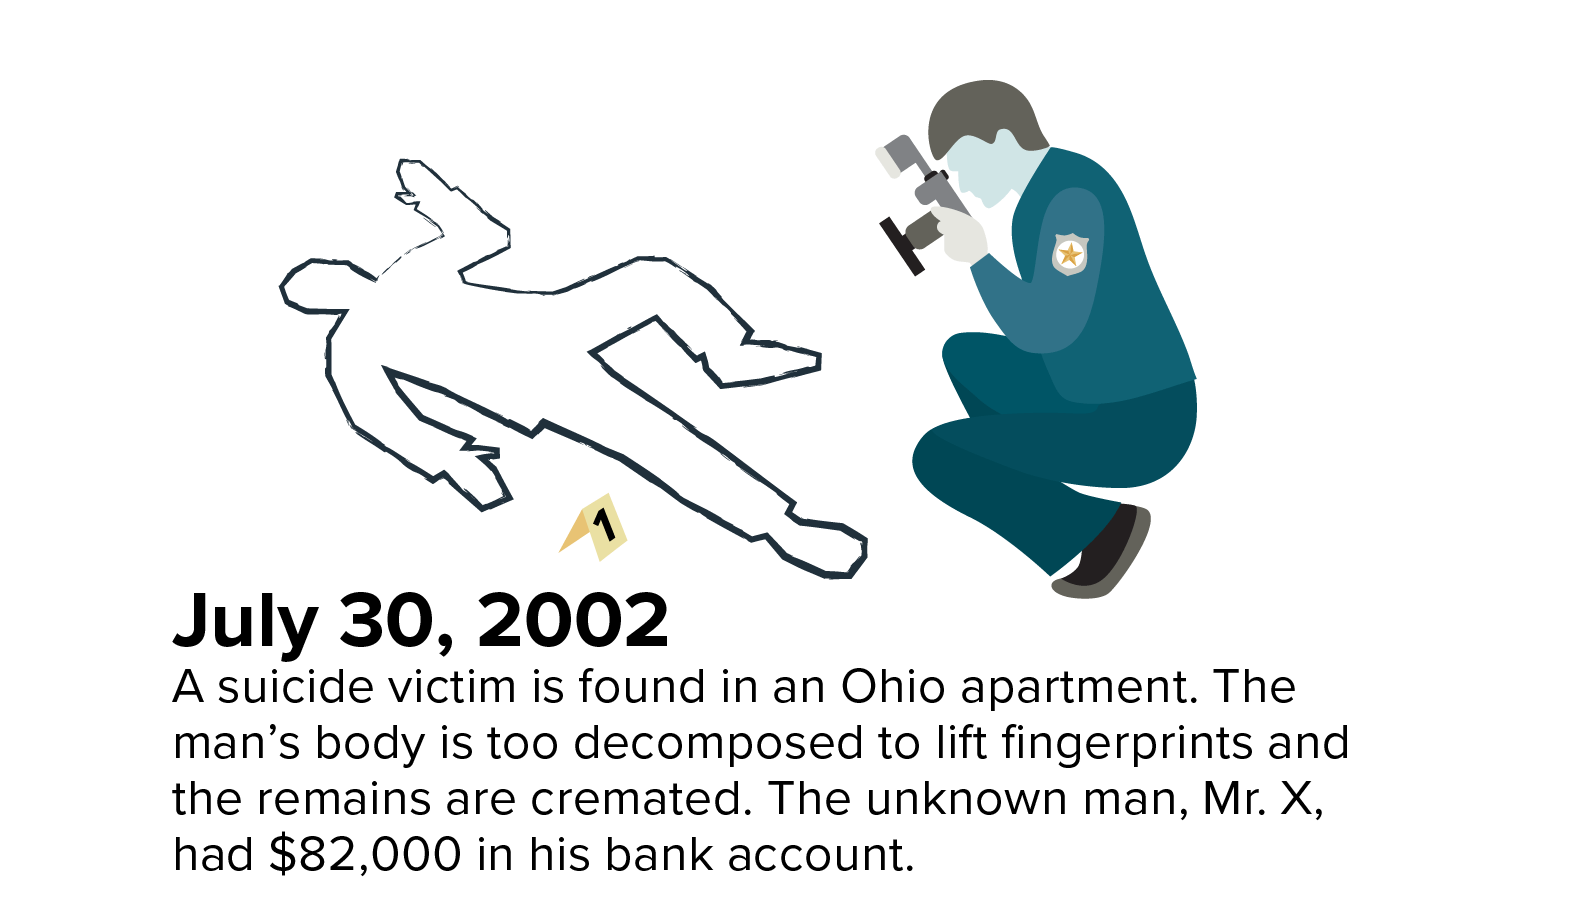 July 30, 2002: A suicide victim is found in an Ohio apartment. The man’s body is too decomposed to lift fingerprints and the remains are cremated. The unknown man, Mr. X, had $82,000 in his bank account.